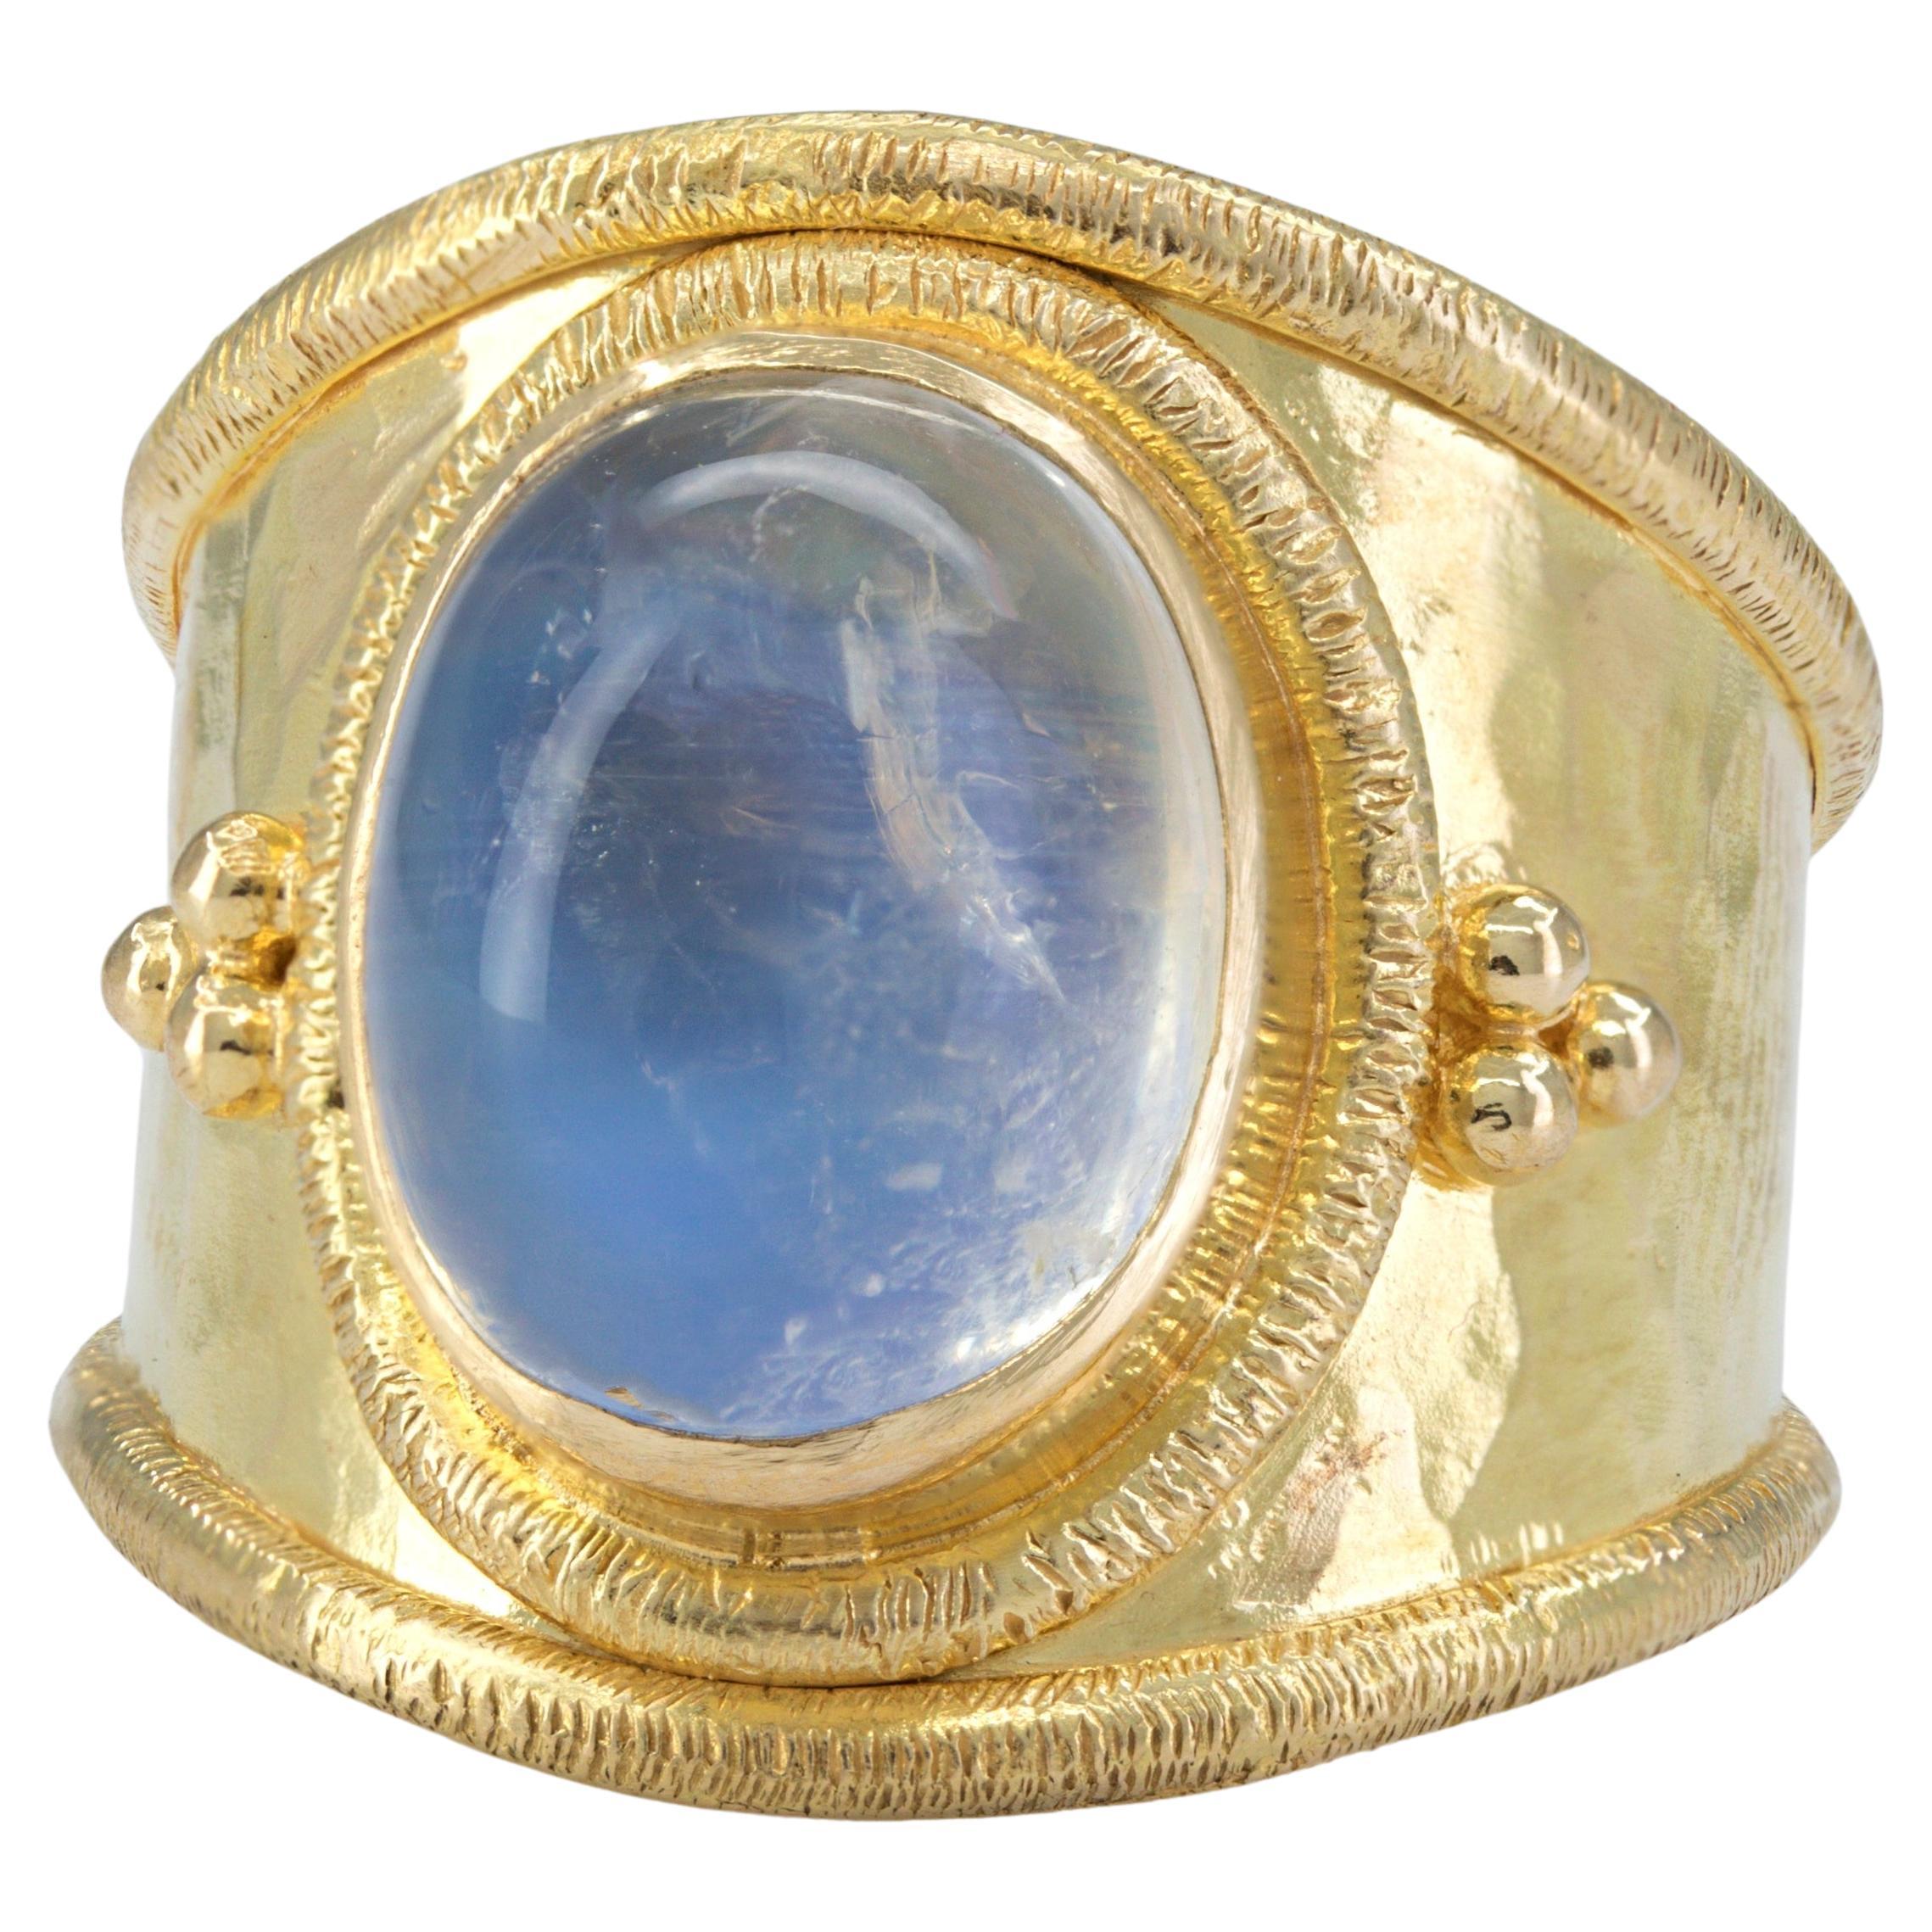 Featuring (1) oval rainbow moonstone cabochon, 11 X 9 mm, bezel set, flanked by coarse granulation, in 18k yellow gold, 17.9 mm tapering to 5.9 mm, size 6.75, marked BATTLLE 18K, Gross weight 7.16 grams.